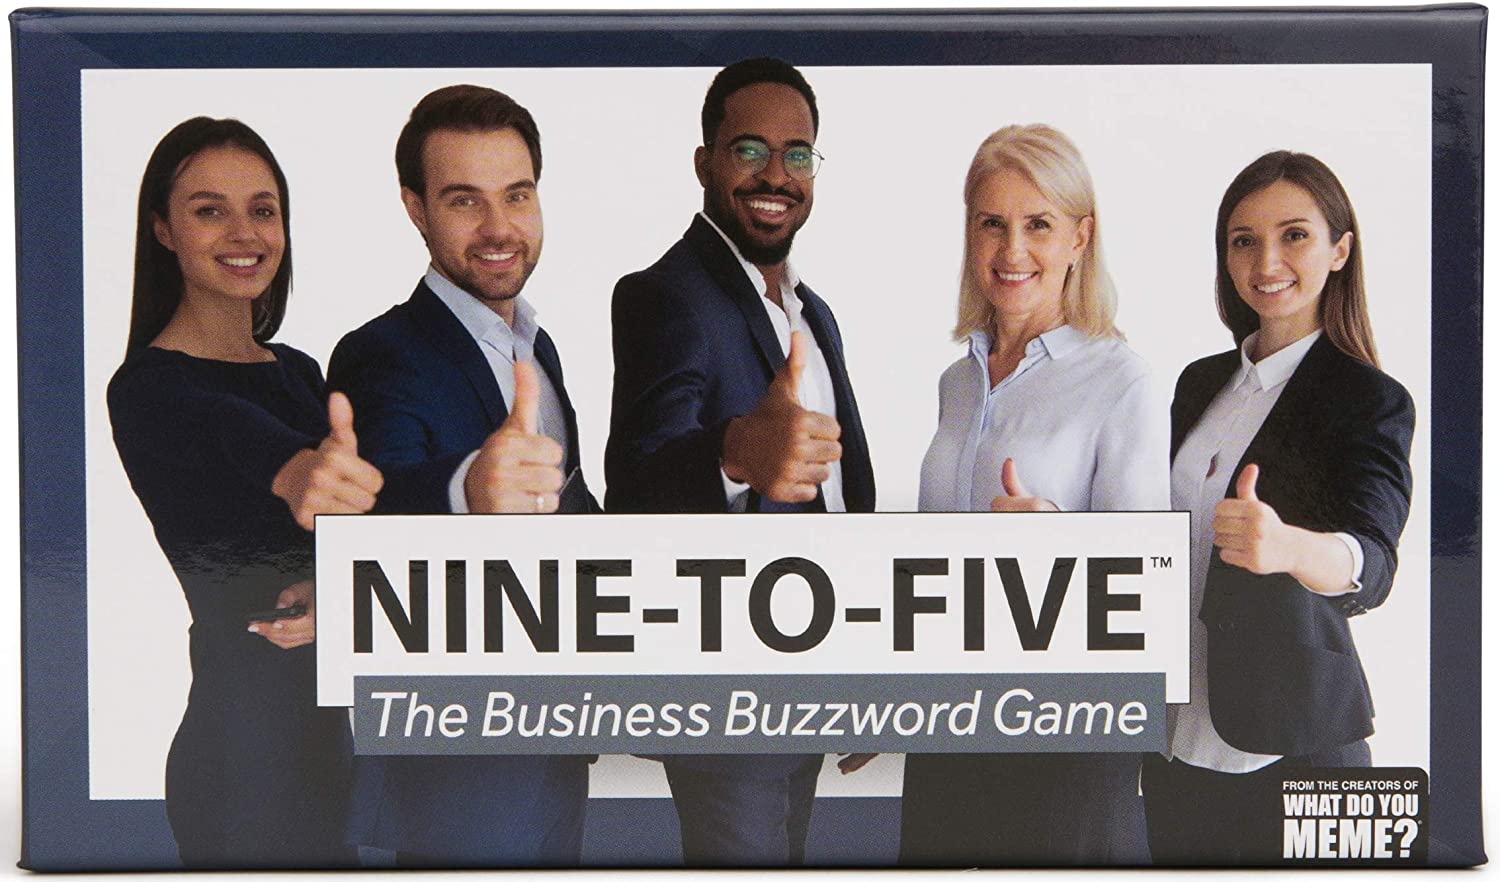 Nine to Five: The Business Buzzword Game